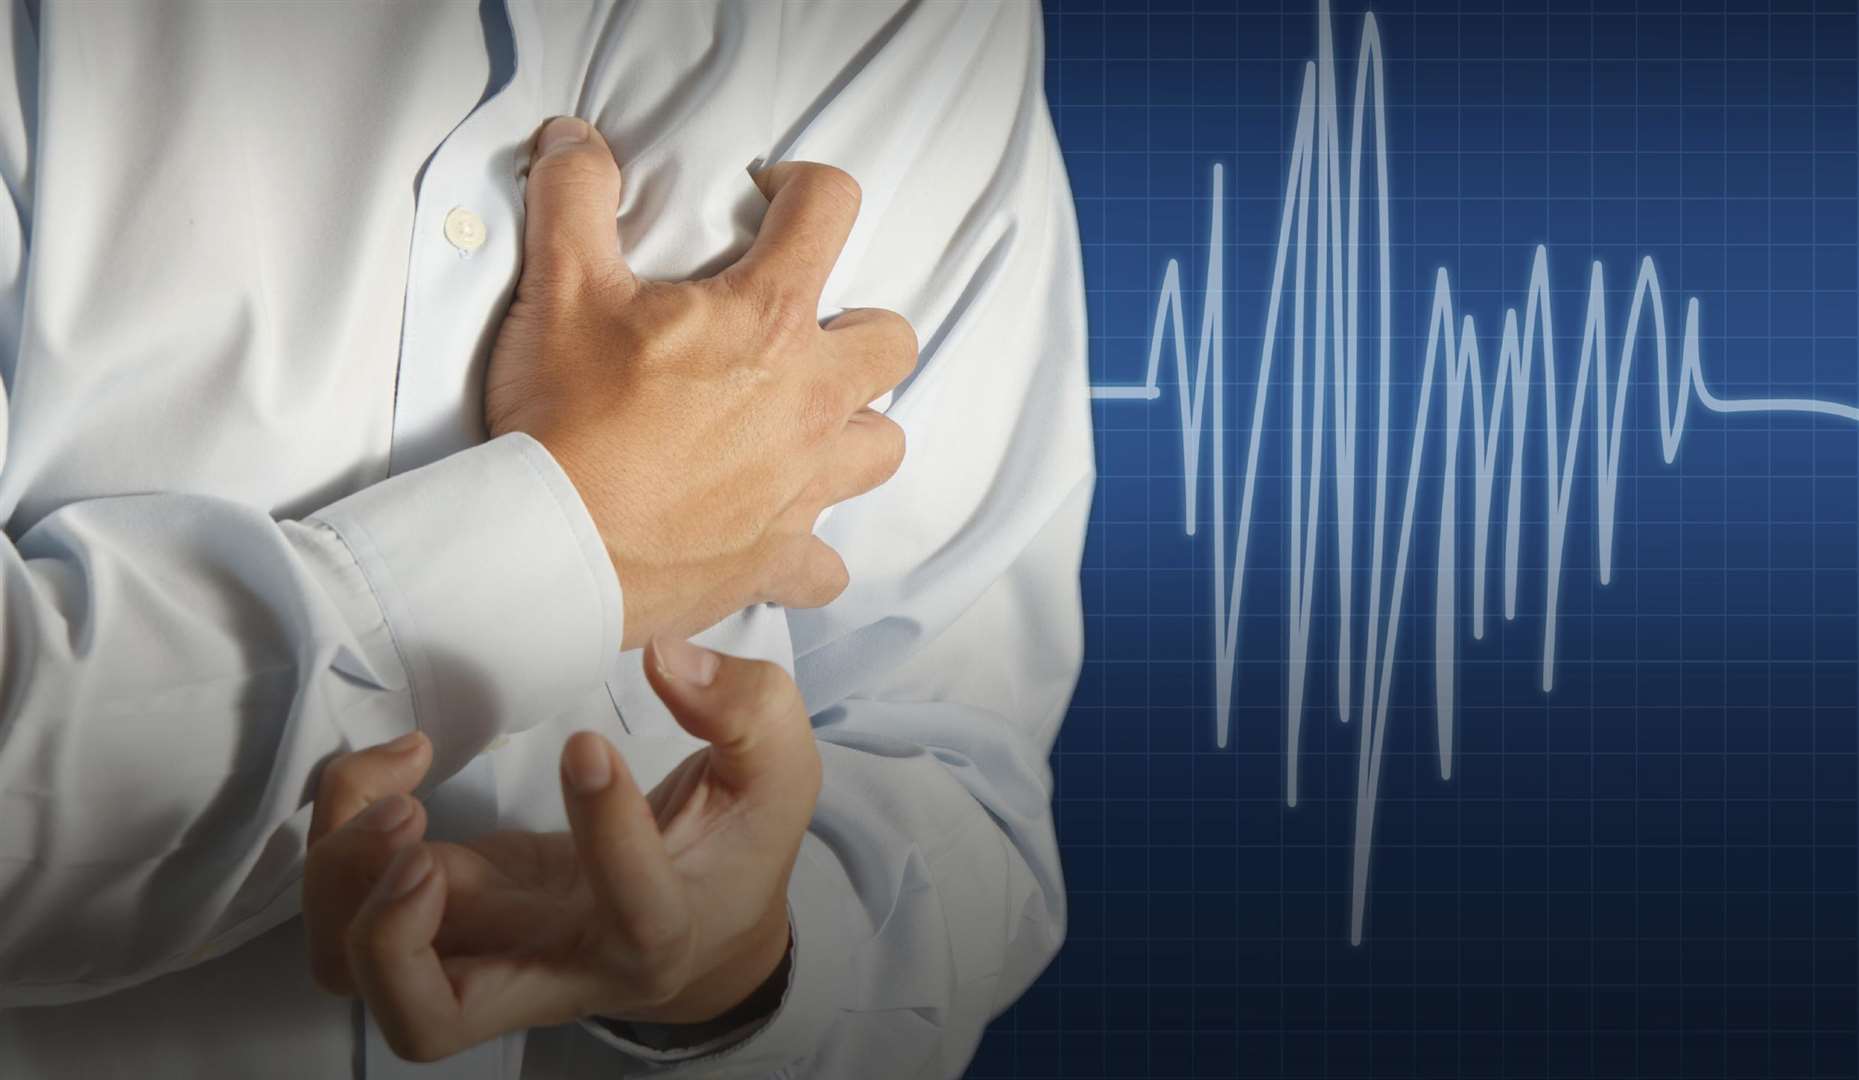 Cardiovascular disease (CVD) - with stroke and heart attack being the most common examples - is the leading cause of death for men and the second leading cause of death for women (istock.com)